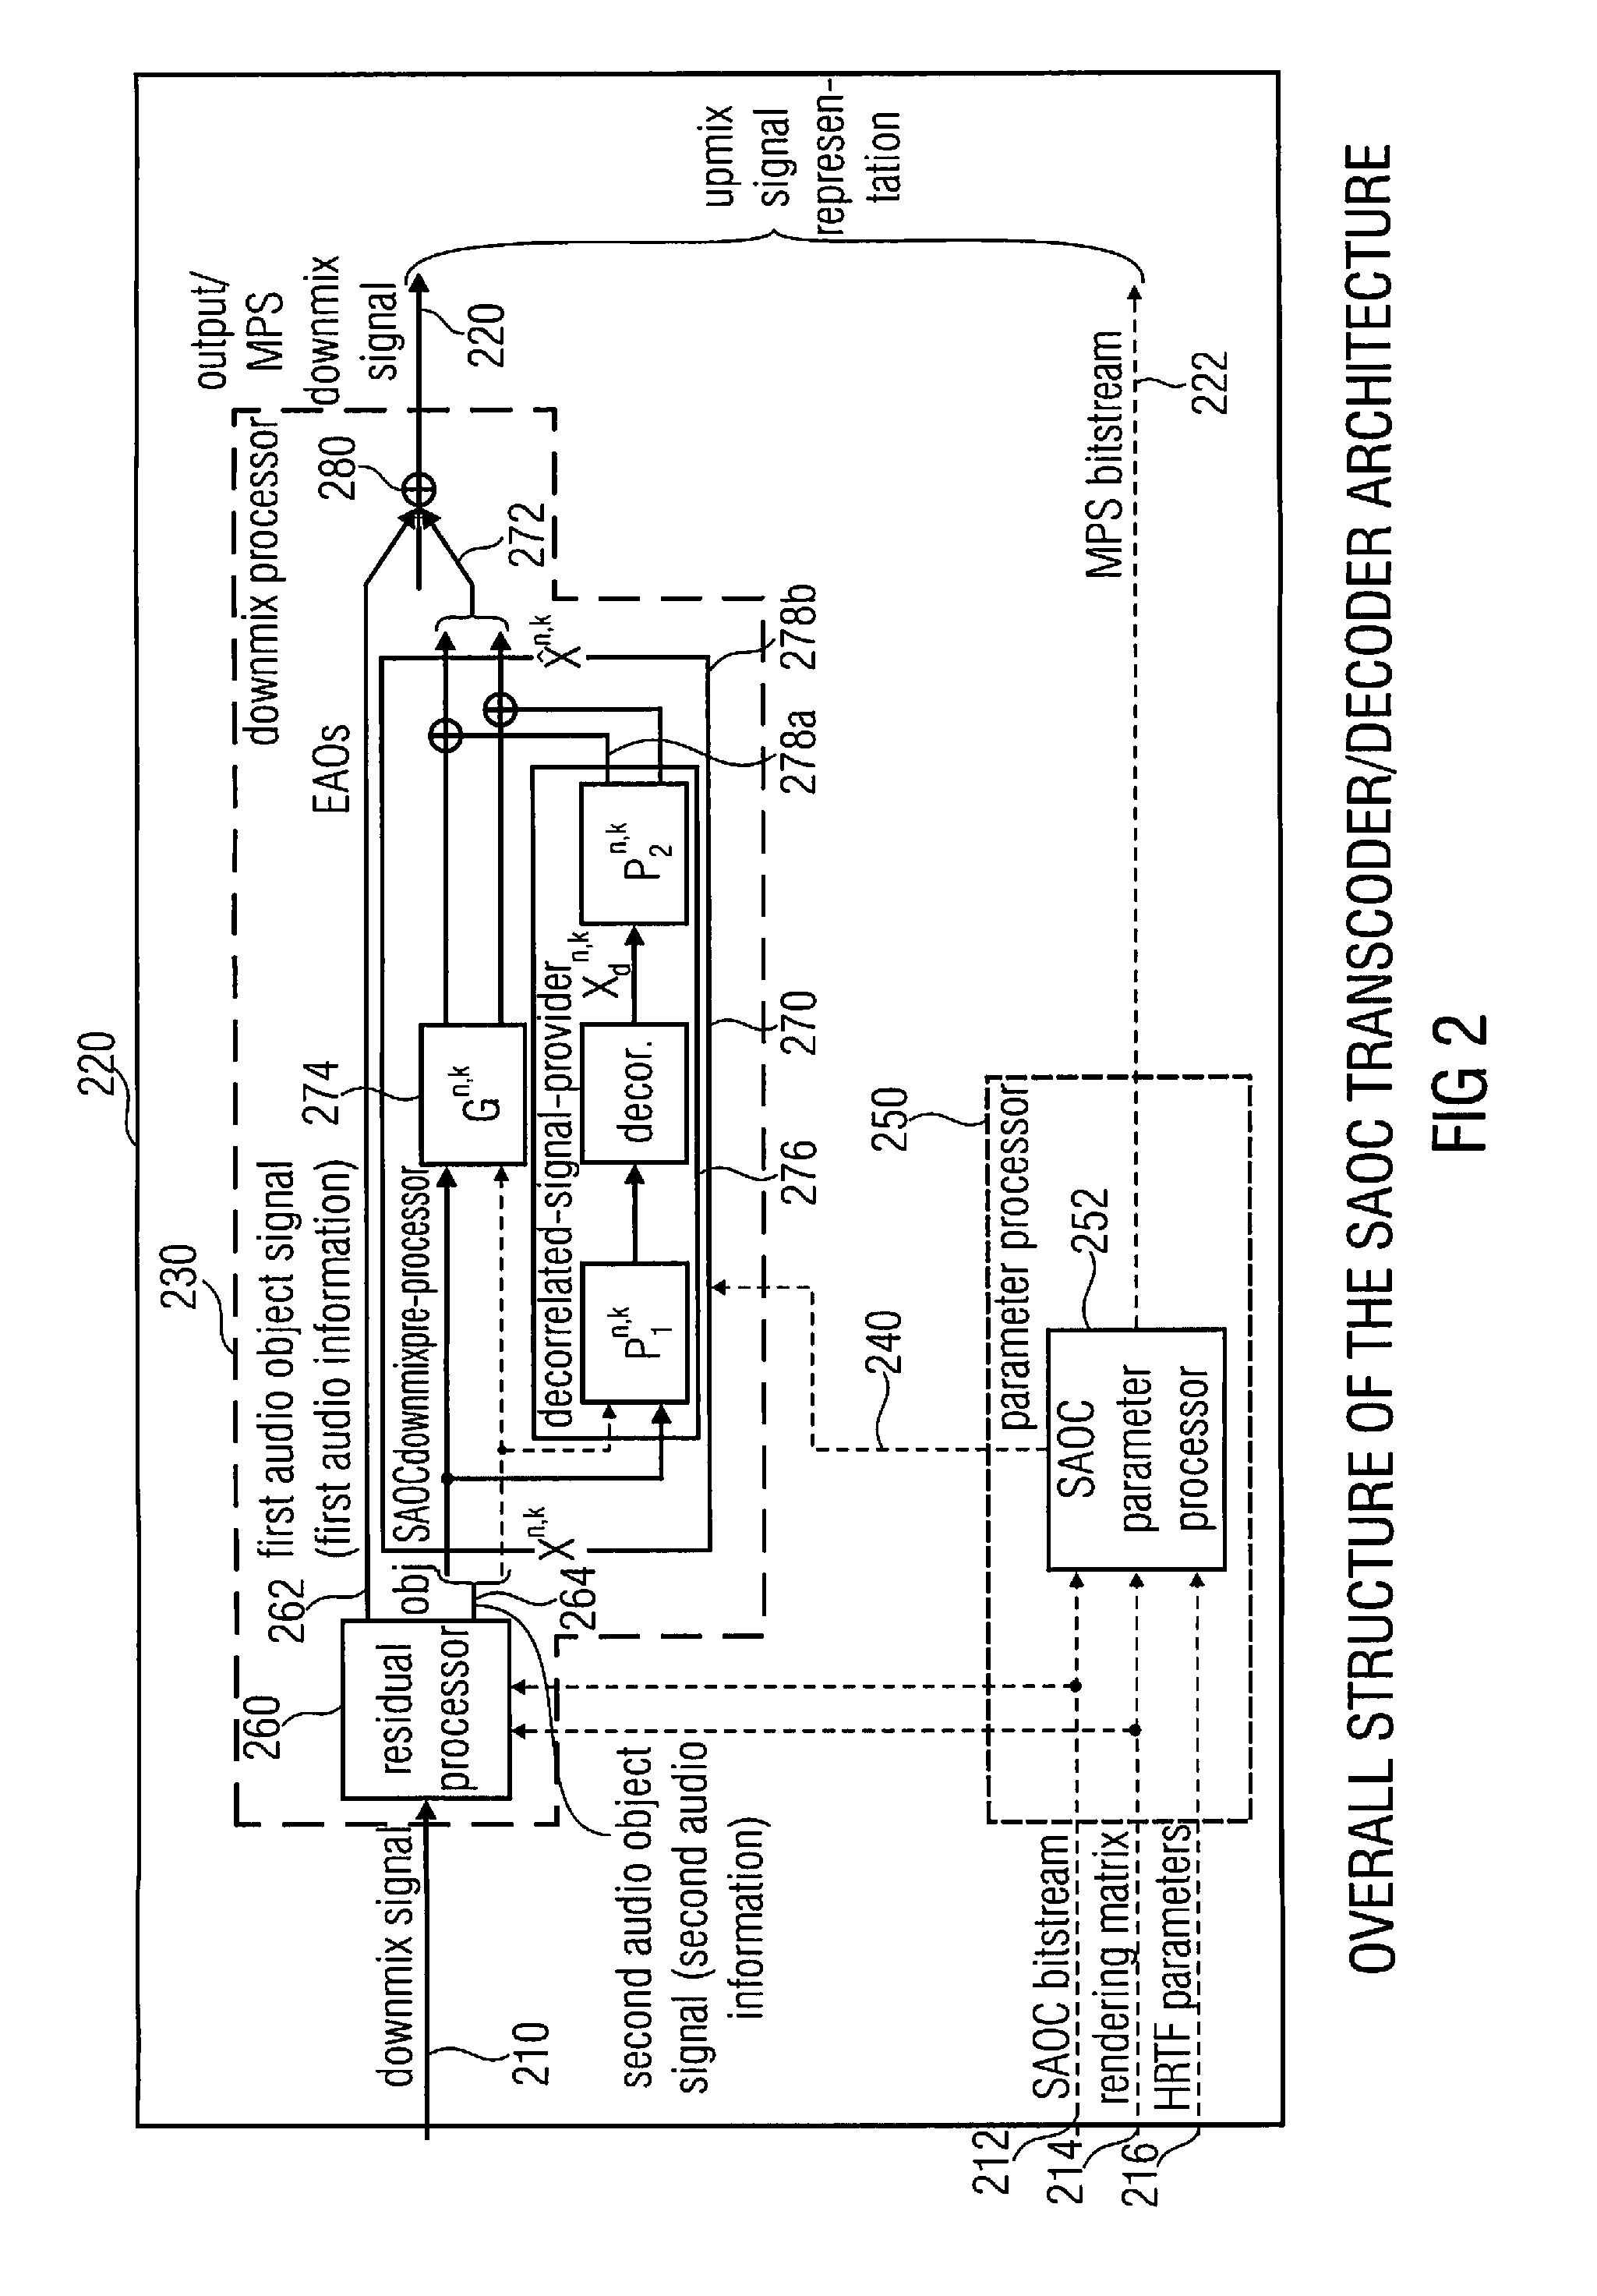 Audio Signal Decoder, Method for Decoding an Audio Signal and Computer Program Using Cascaded Audio Object Processing Stages